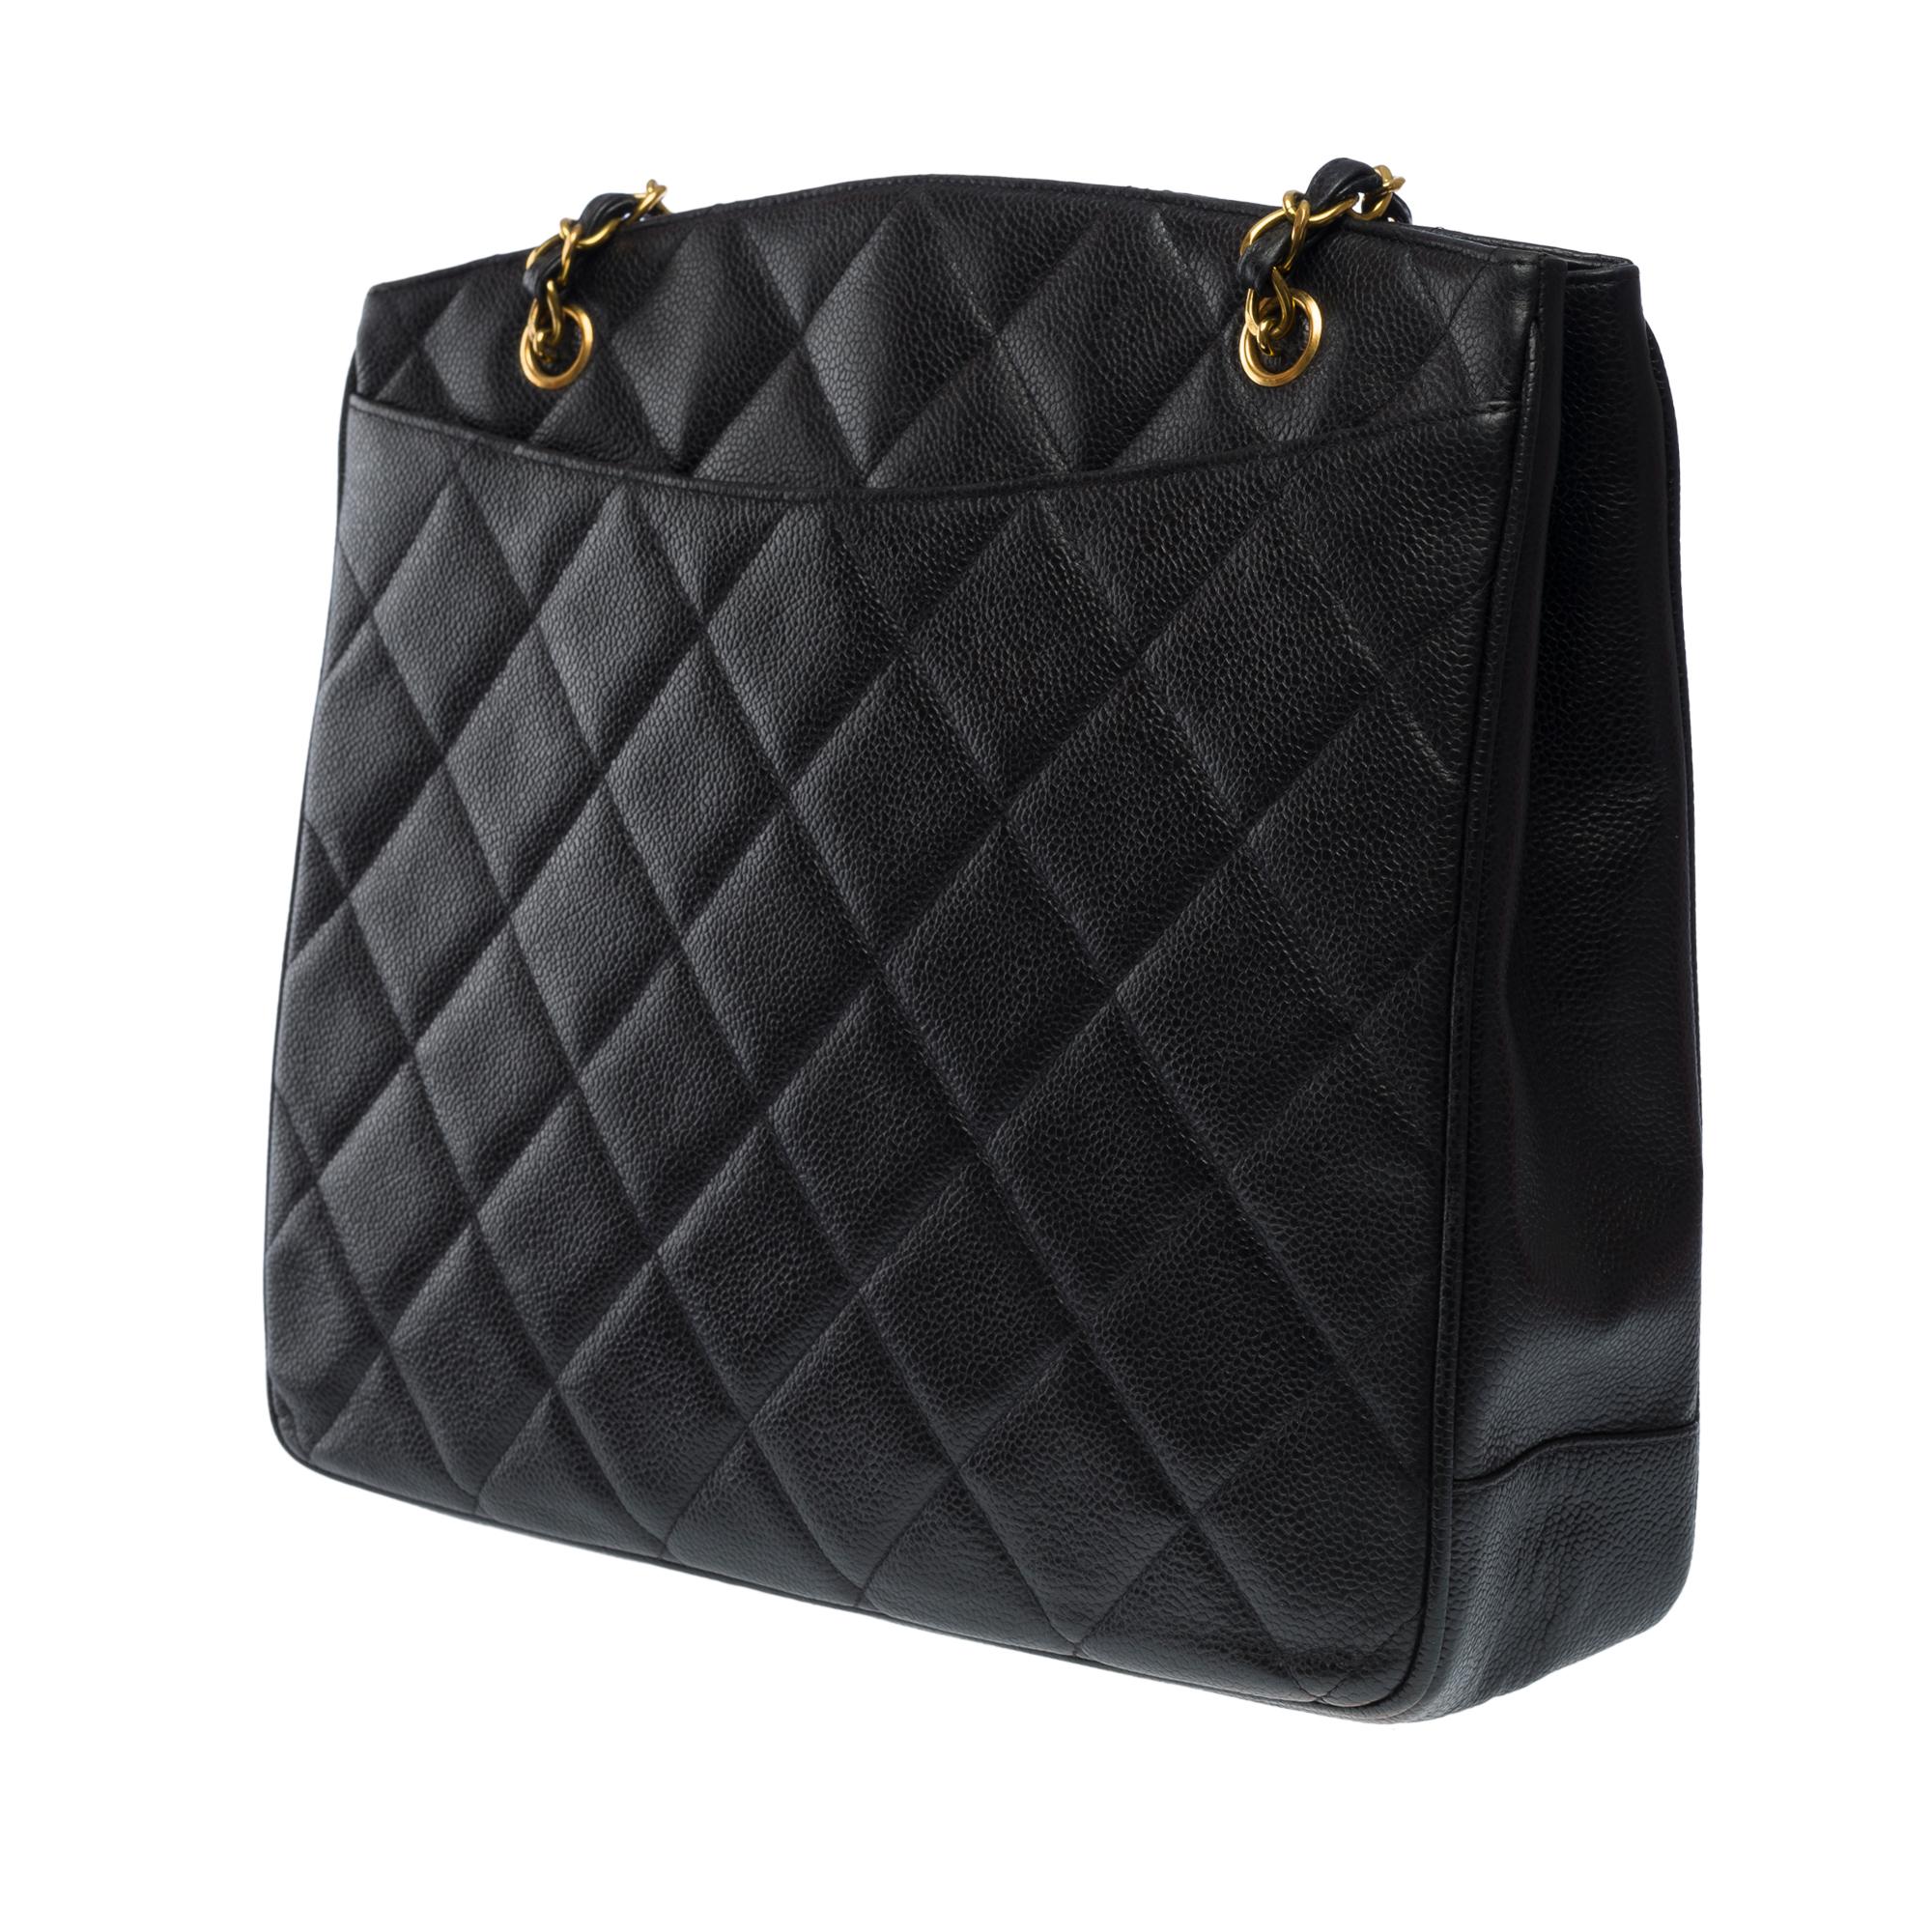 Amazing Chanel Shopping Tote bag in black Caviar quilted leather, GHW 1